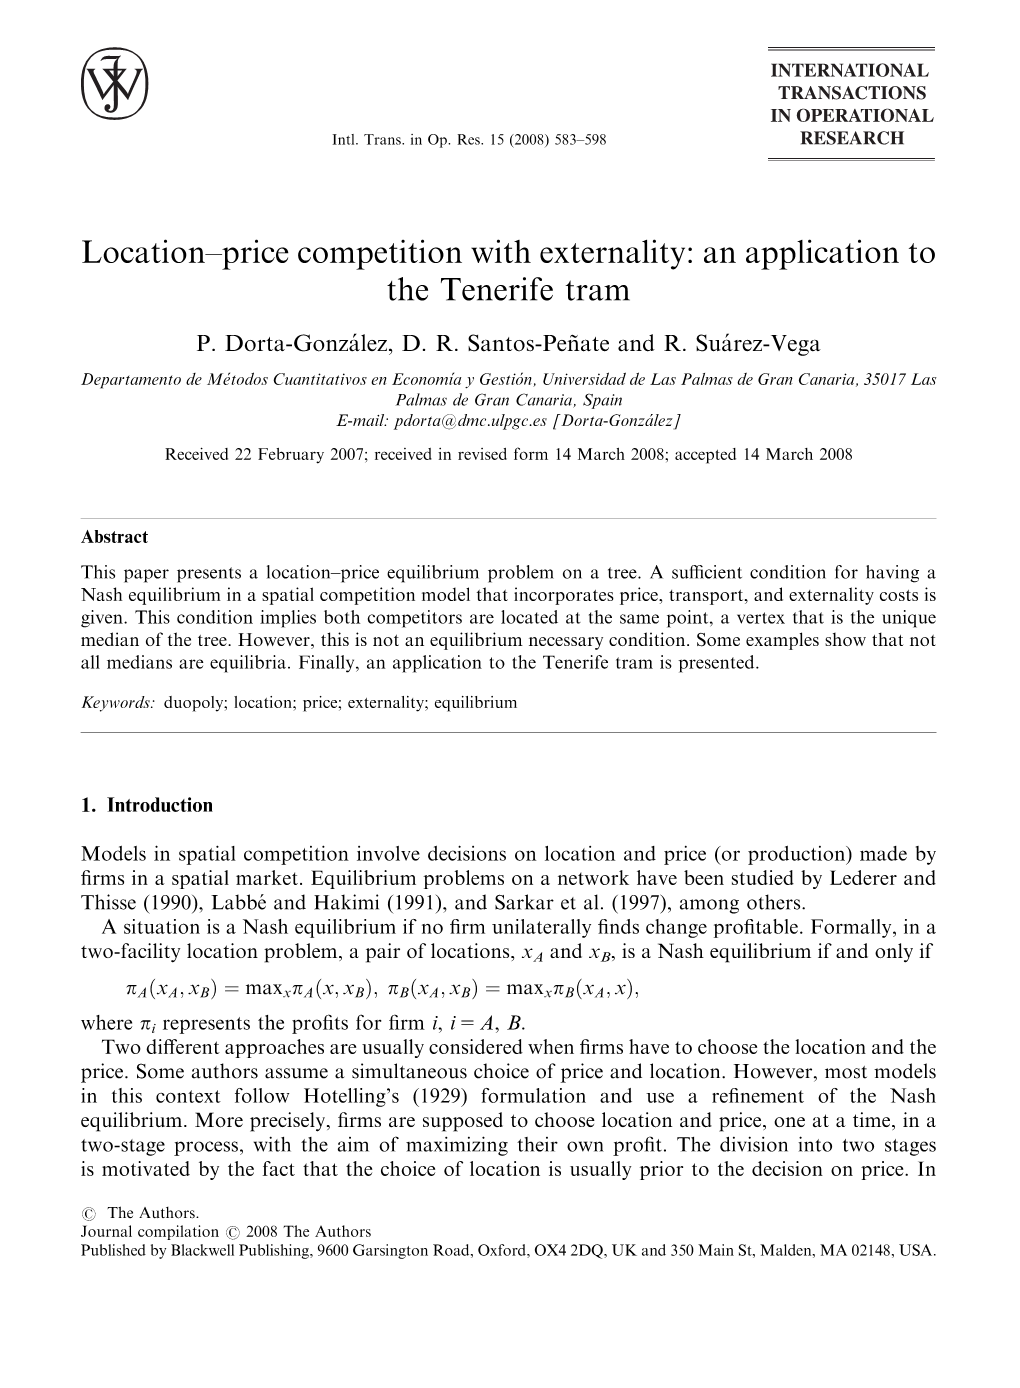 Location–Price Competition with Externality: an Application to the Tenerife Tram